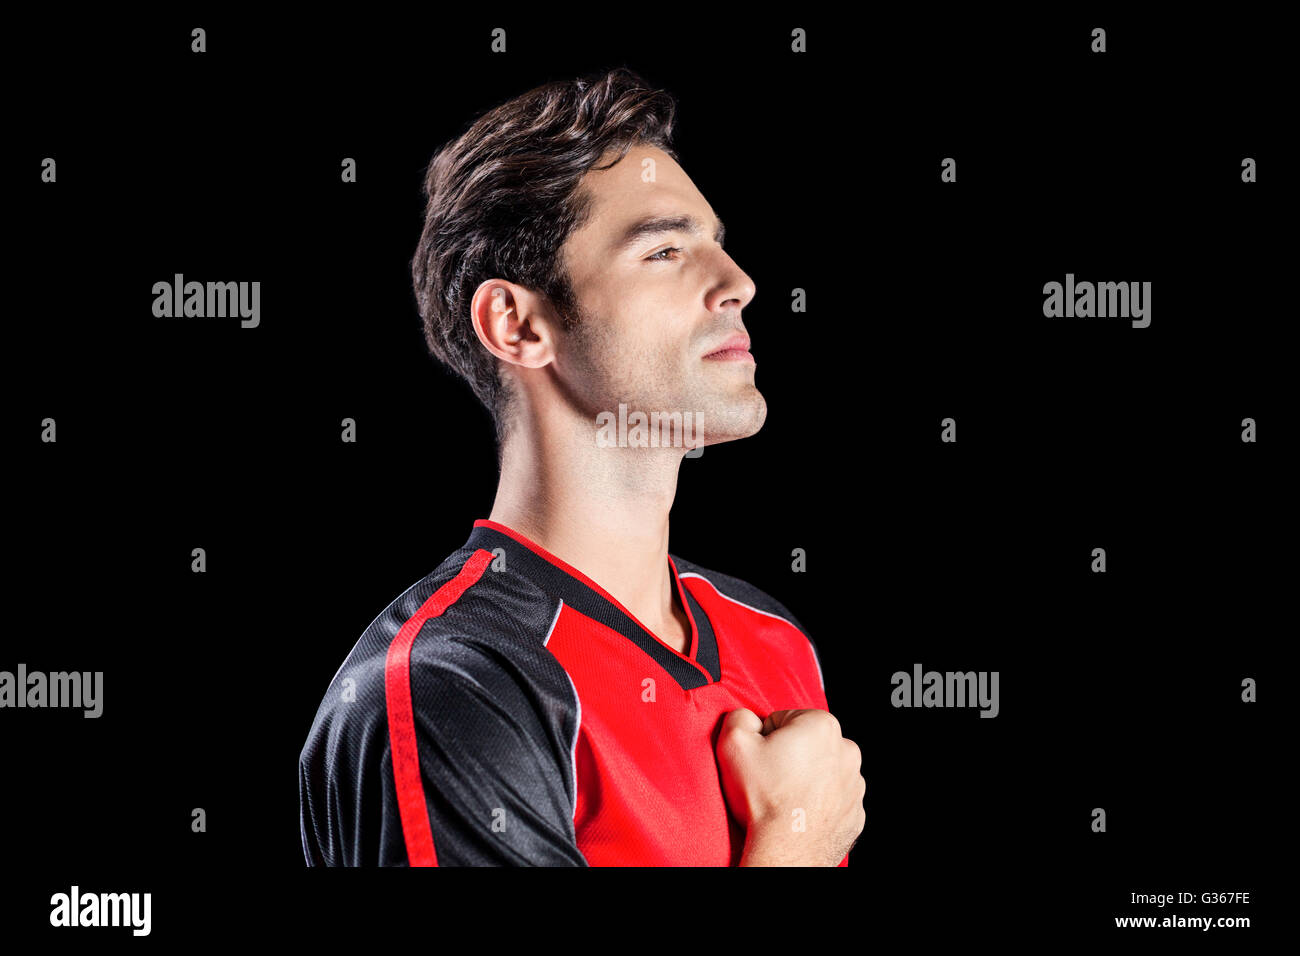 Athlete showing respect during national anthem Stock Photo